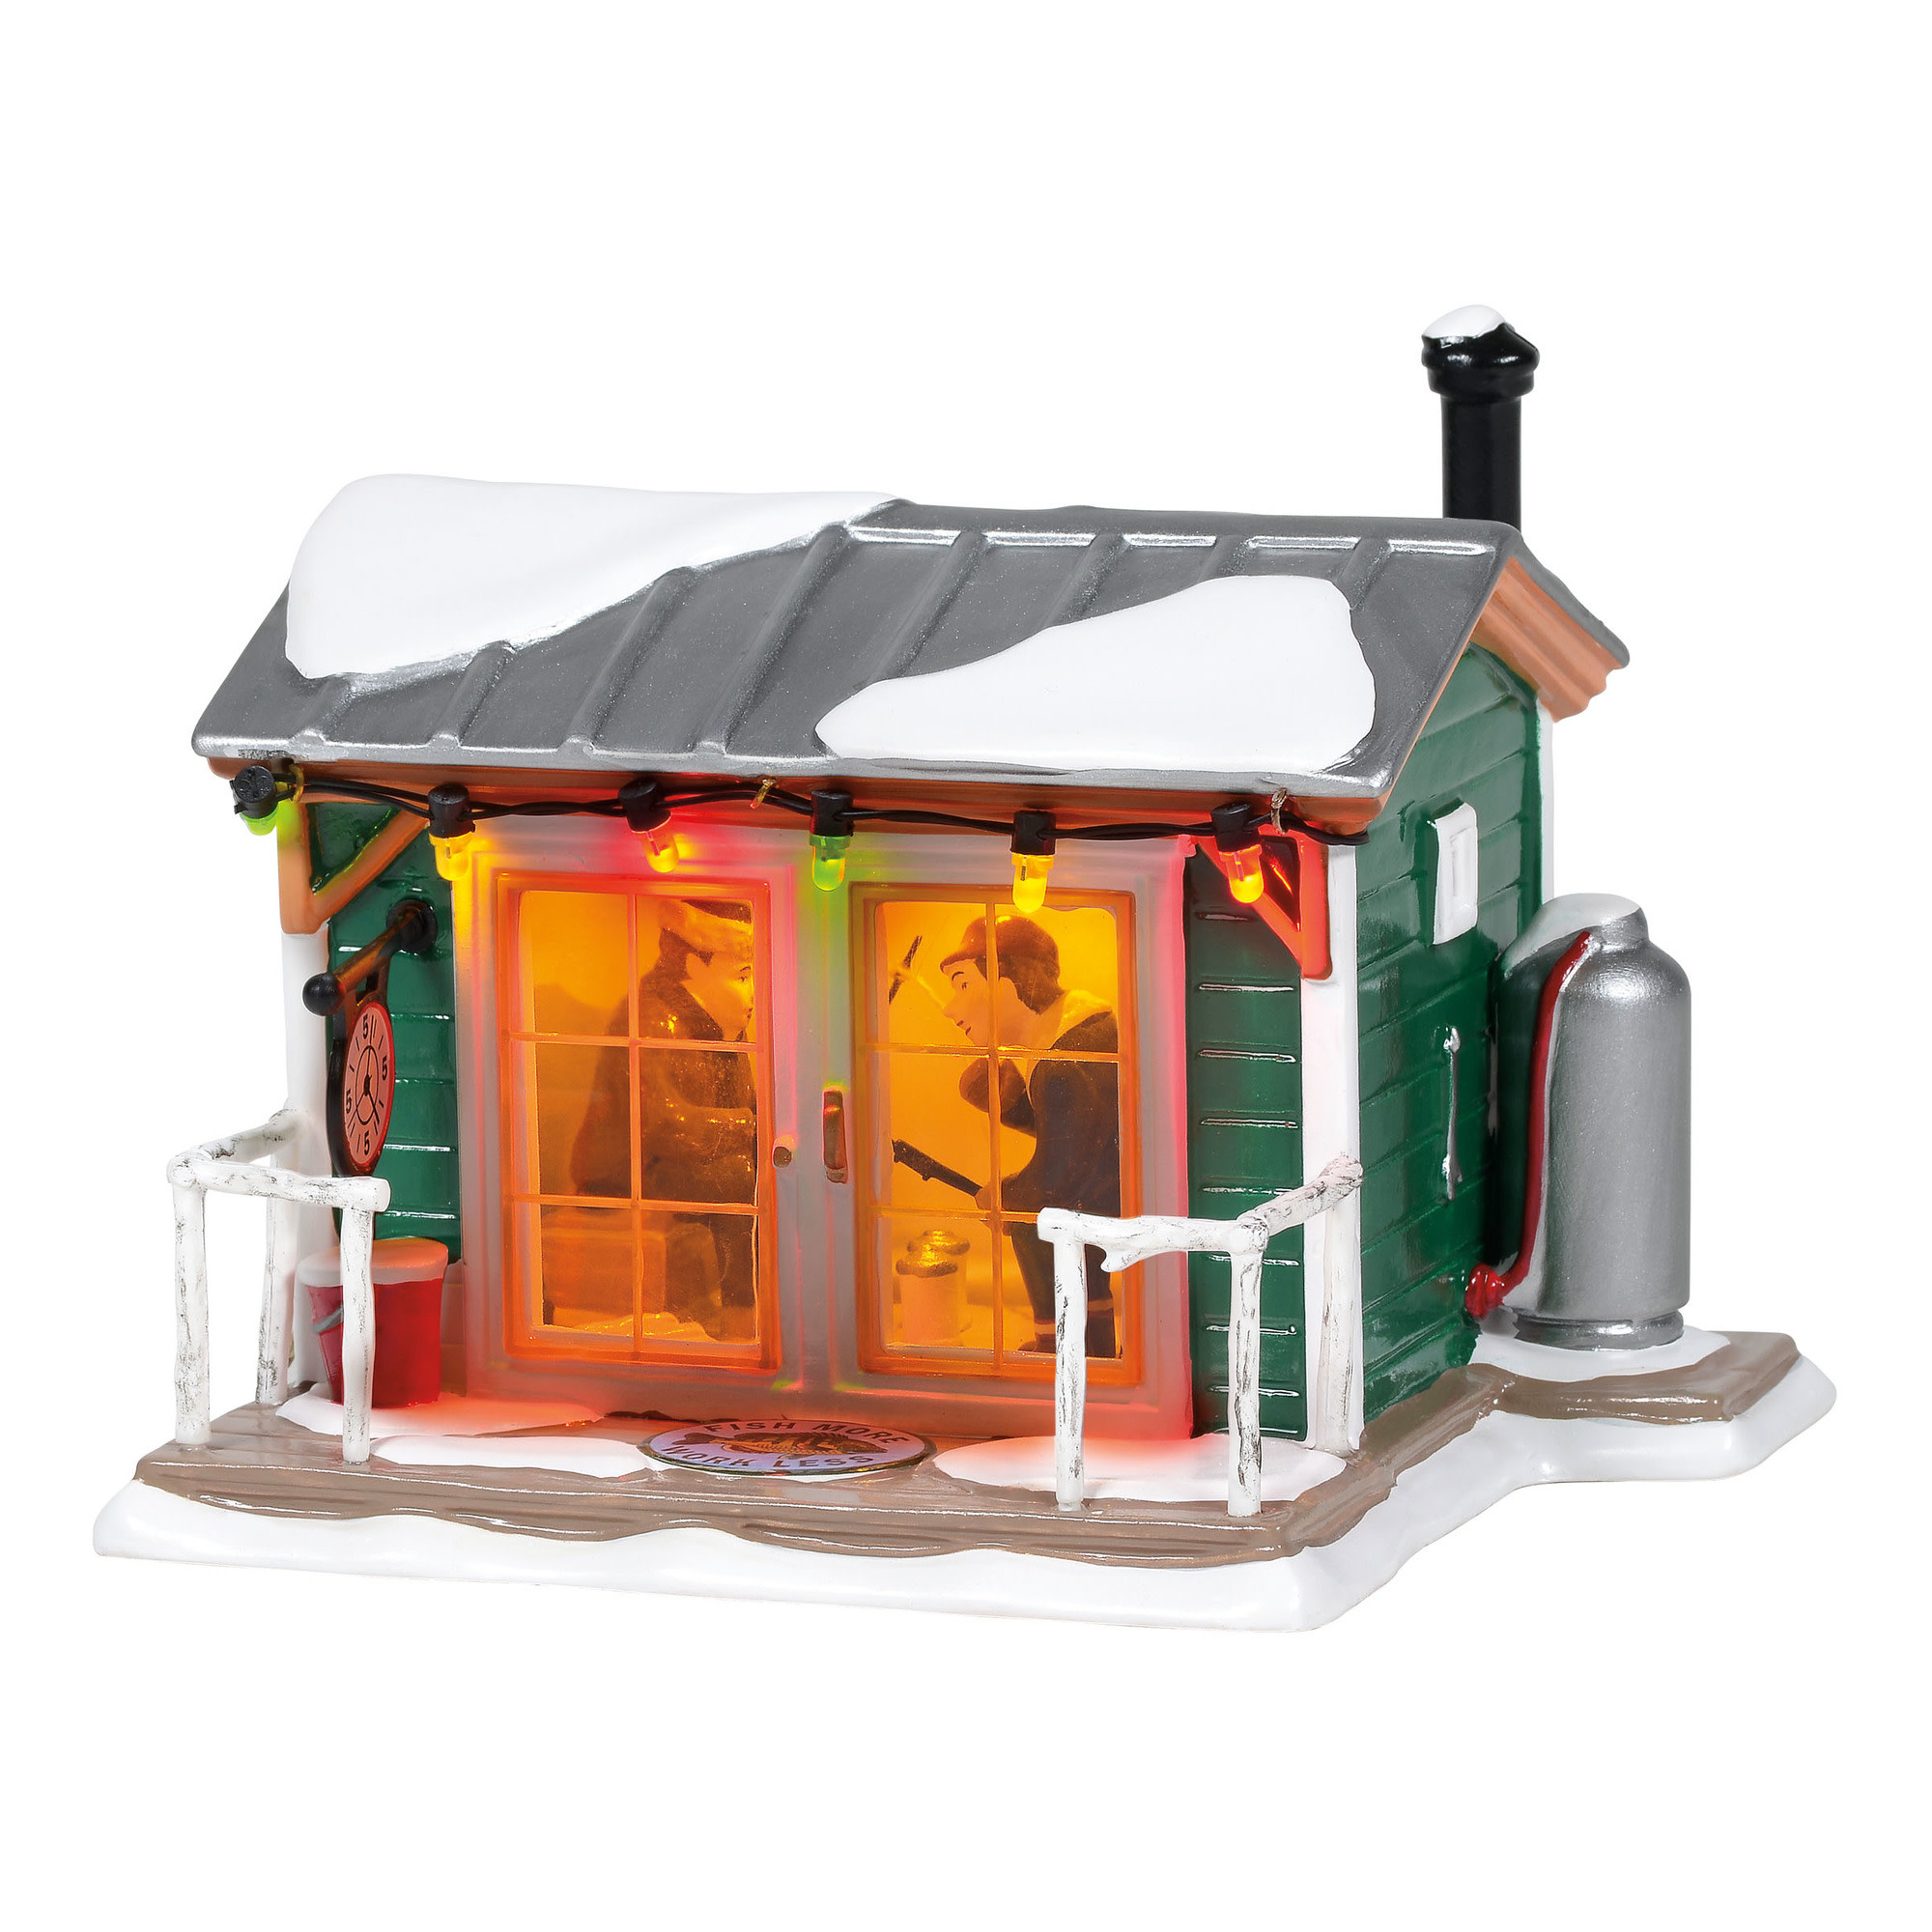 Home Sleet Home Fish Shack for Snow Village by Department 56 - The